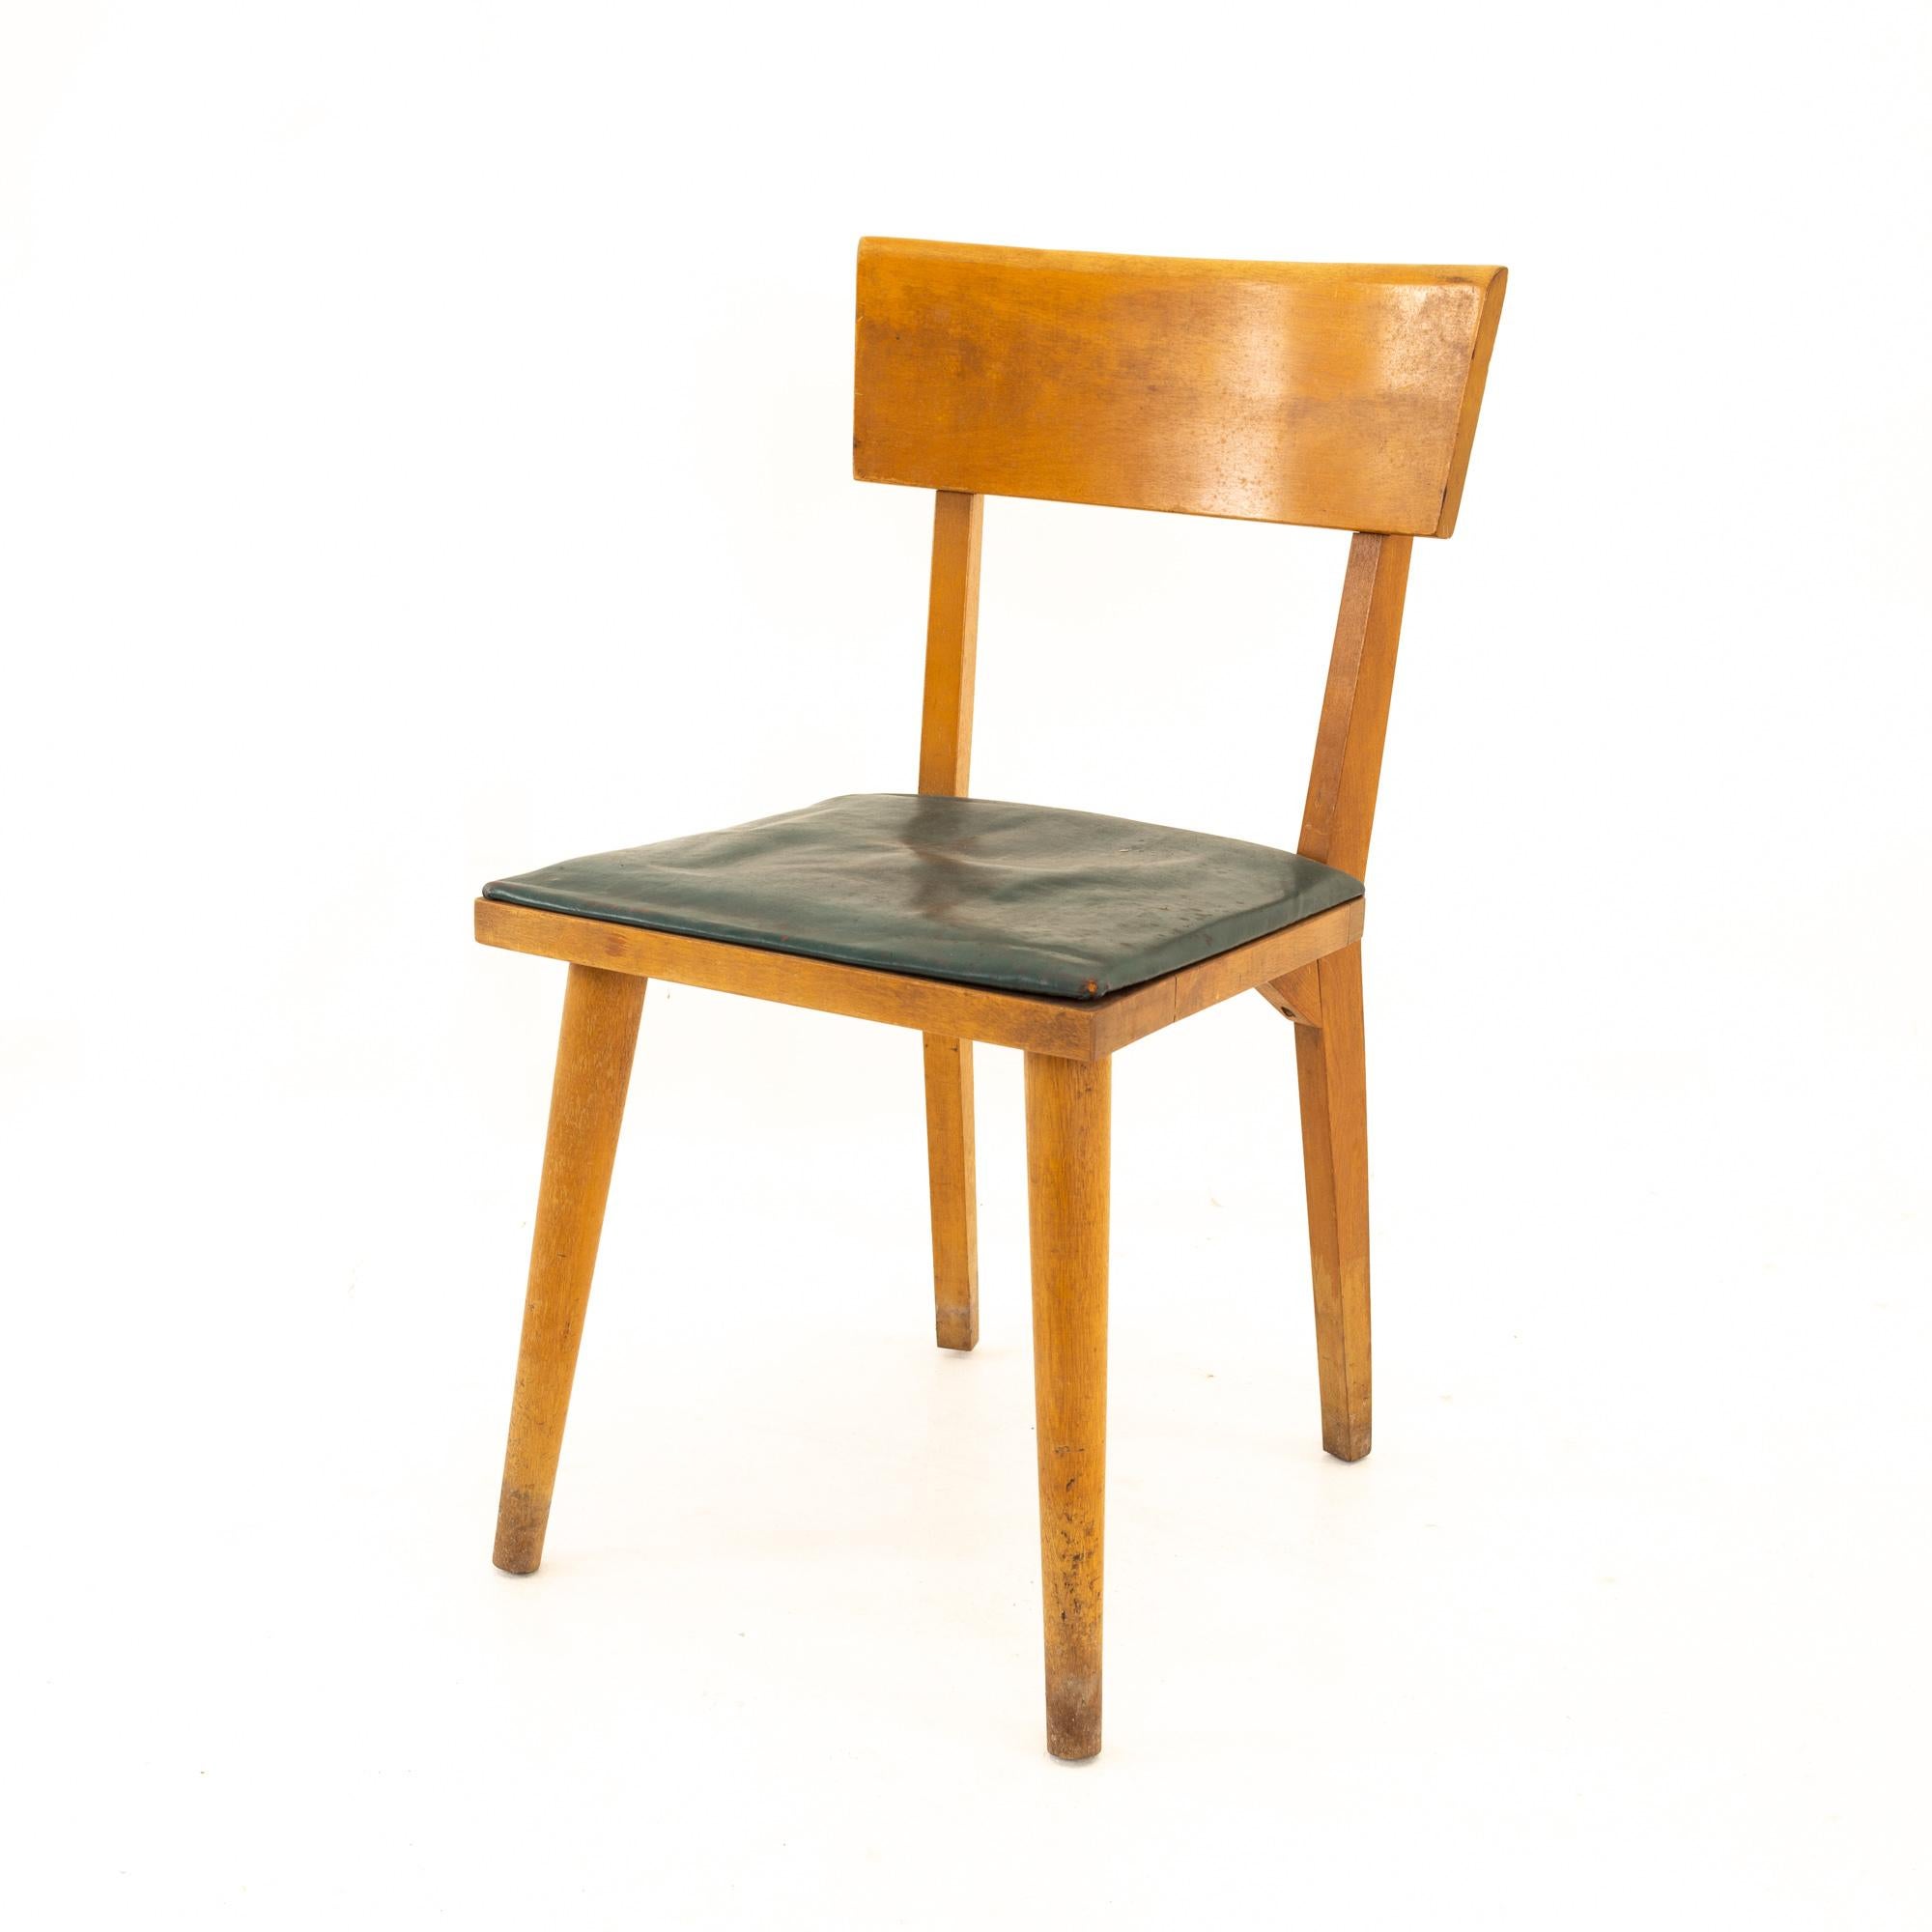 Russel Wright for Conant Ball Young American modern mid century dining chair
Chair measures: 16.5 wide x 19.5 deep x 31.25 high, with a seat height of 17.5 inches 

All pieces of furniture can be had in what we call restored vintage condition.